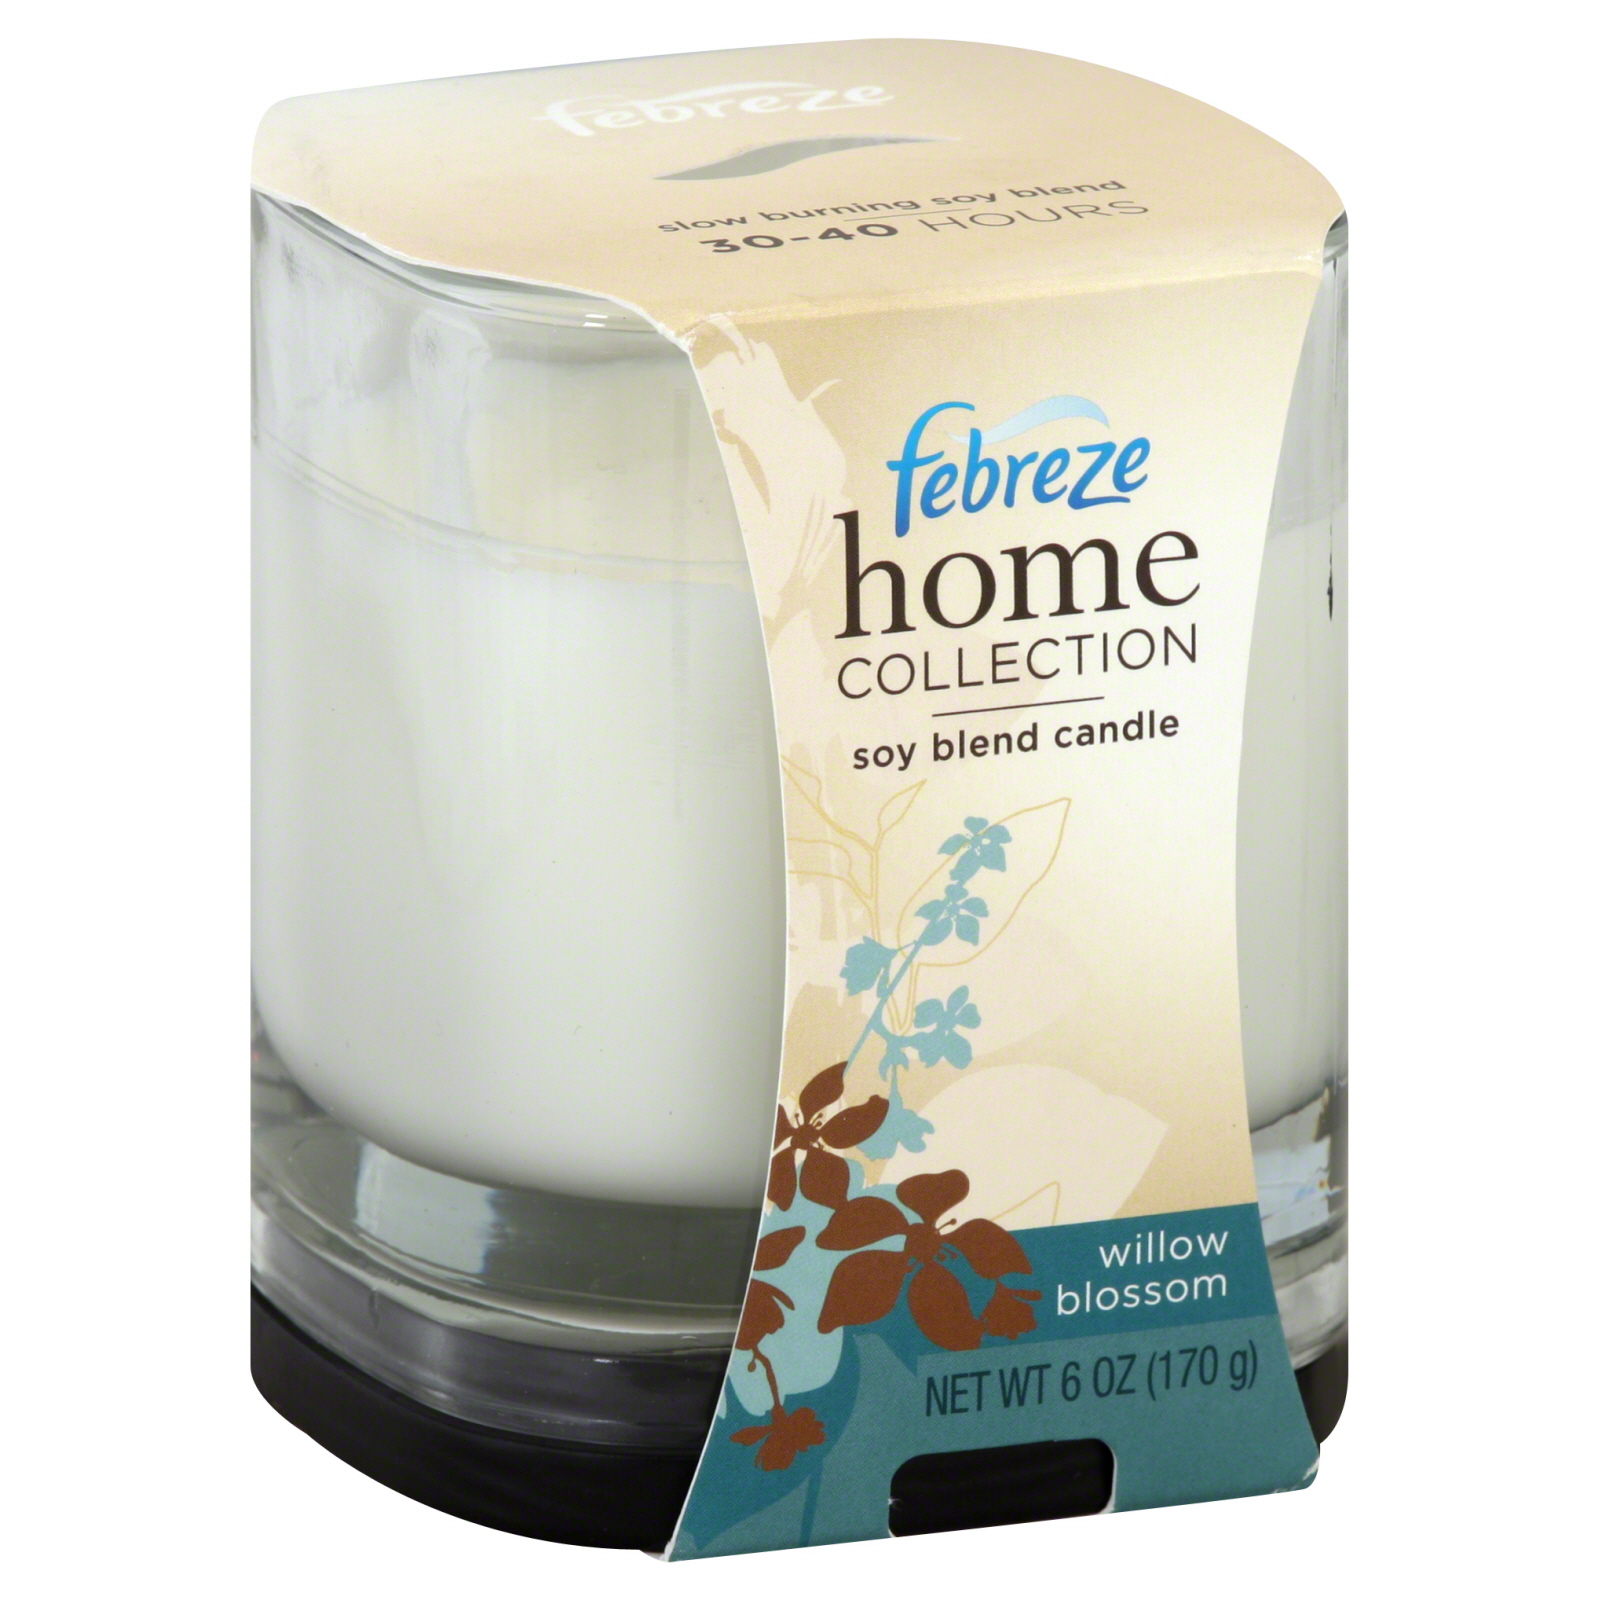 Febreze Home Collection Soy Candle, Willow Blossom, 1 candle [6 oz (170 g)]